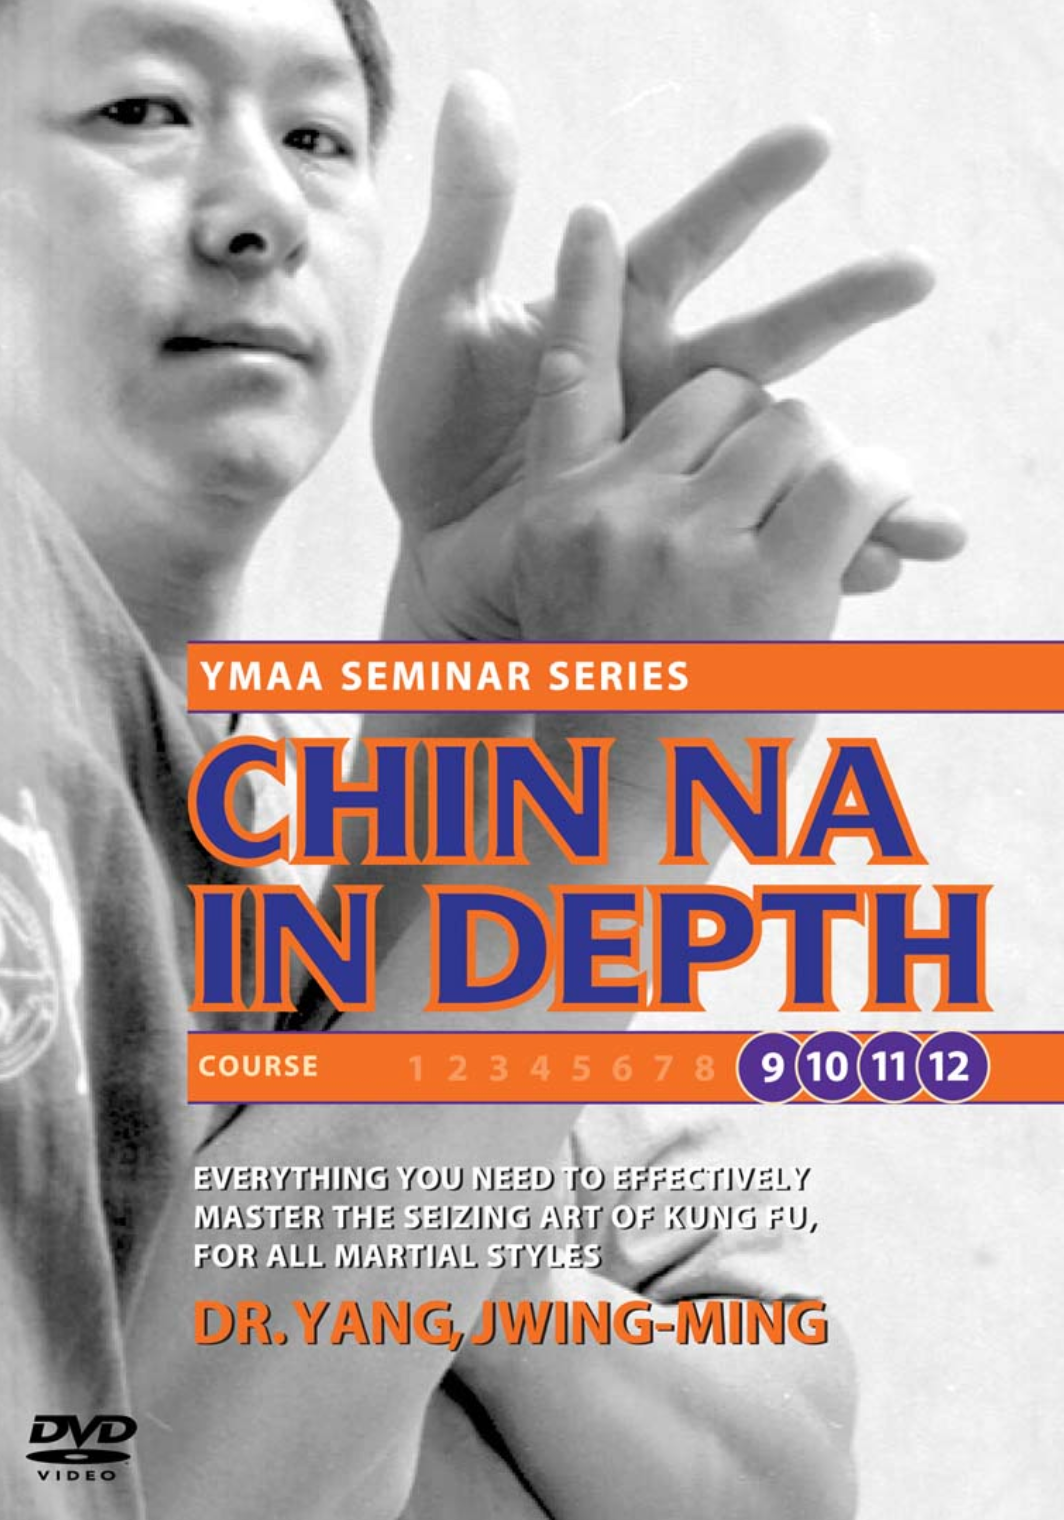 Chin Na In Depth Courses 9-12 DVD with Dr. Yang, Jwing-Ming - Budovideos Inc